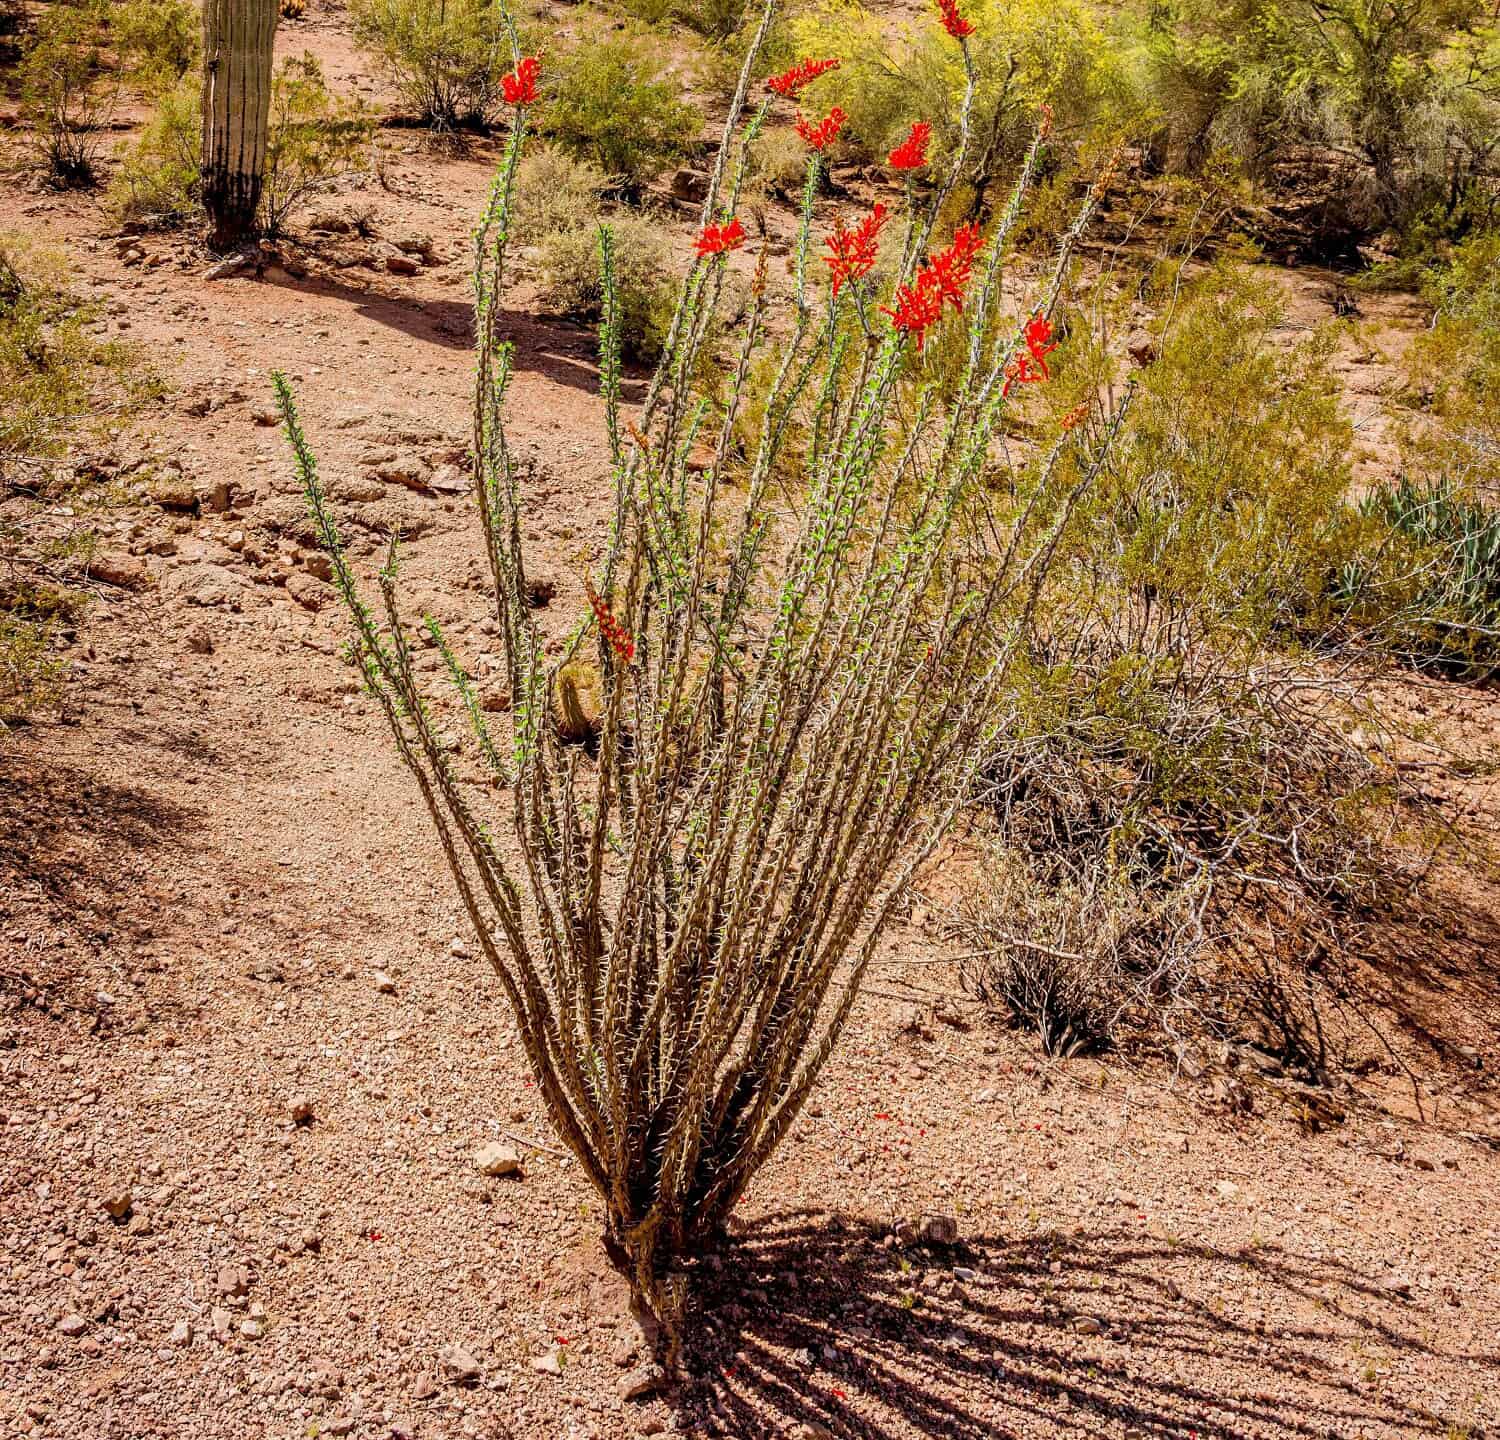 A blooming ocotillo cactus with saguaro cactus and mountain